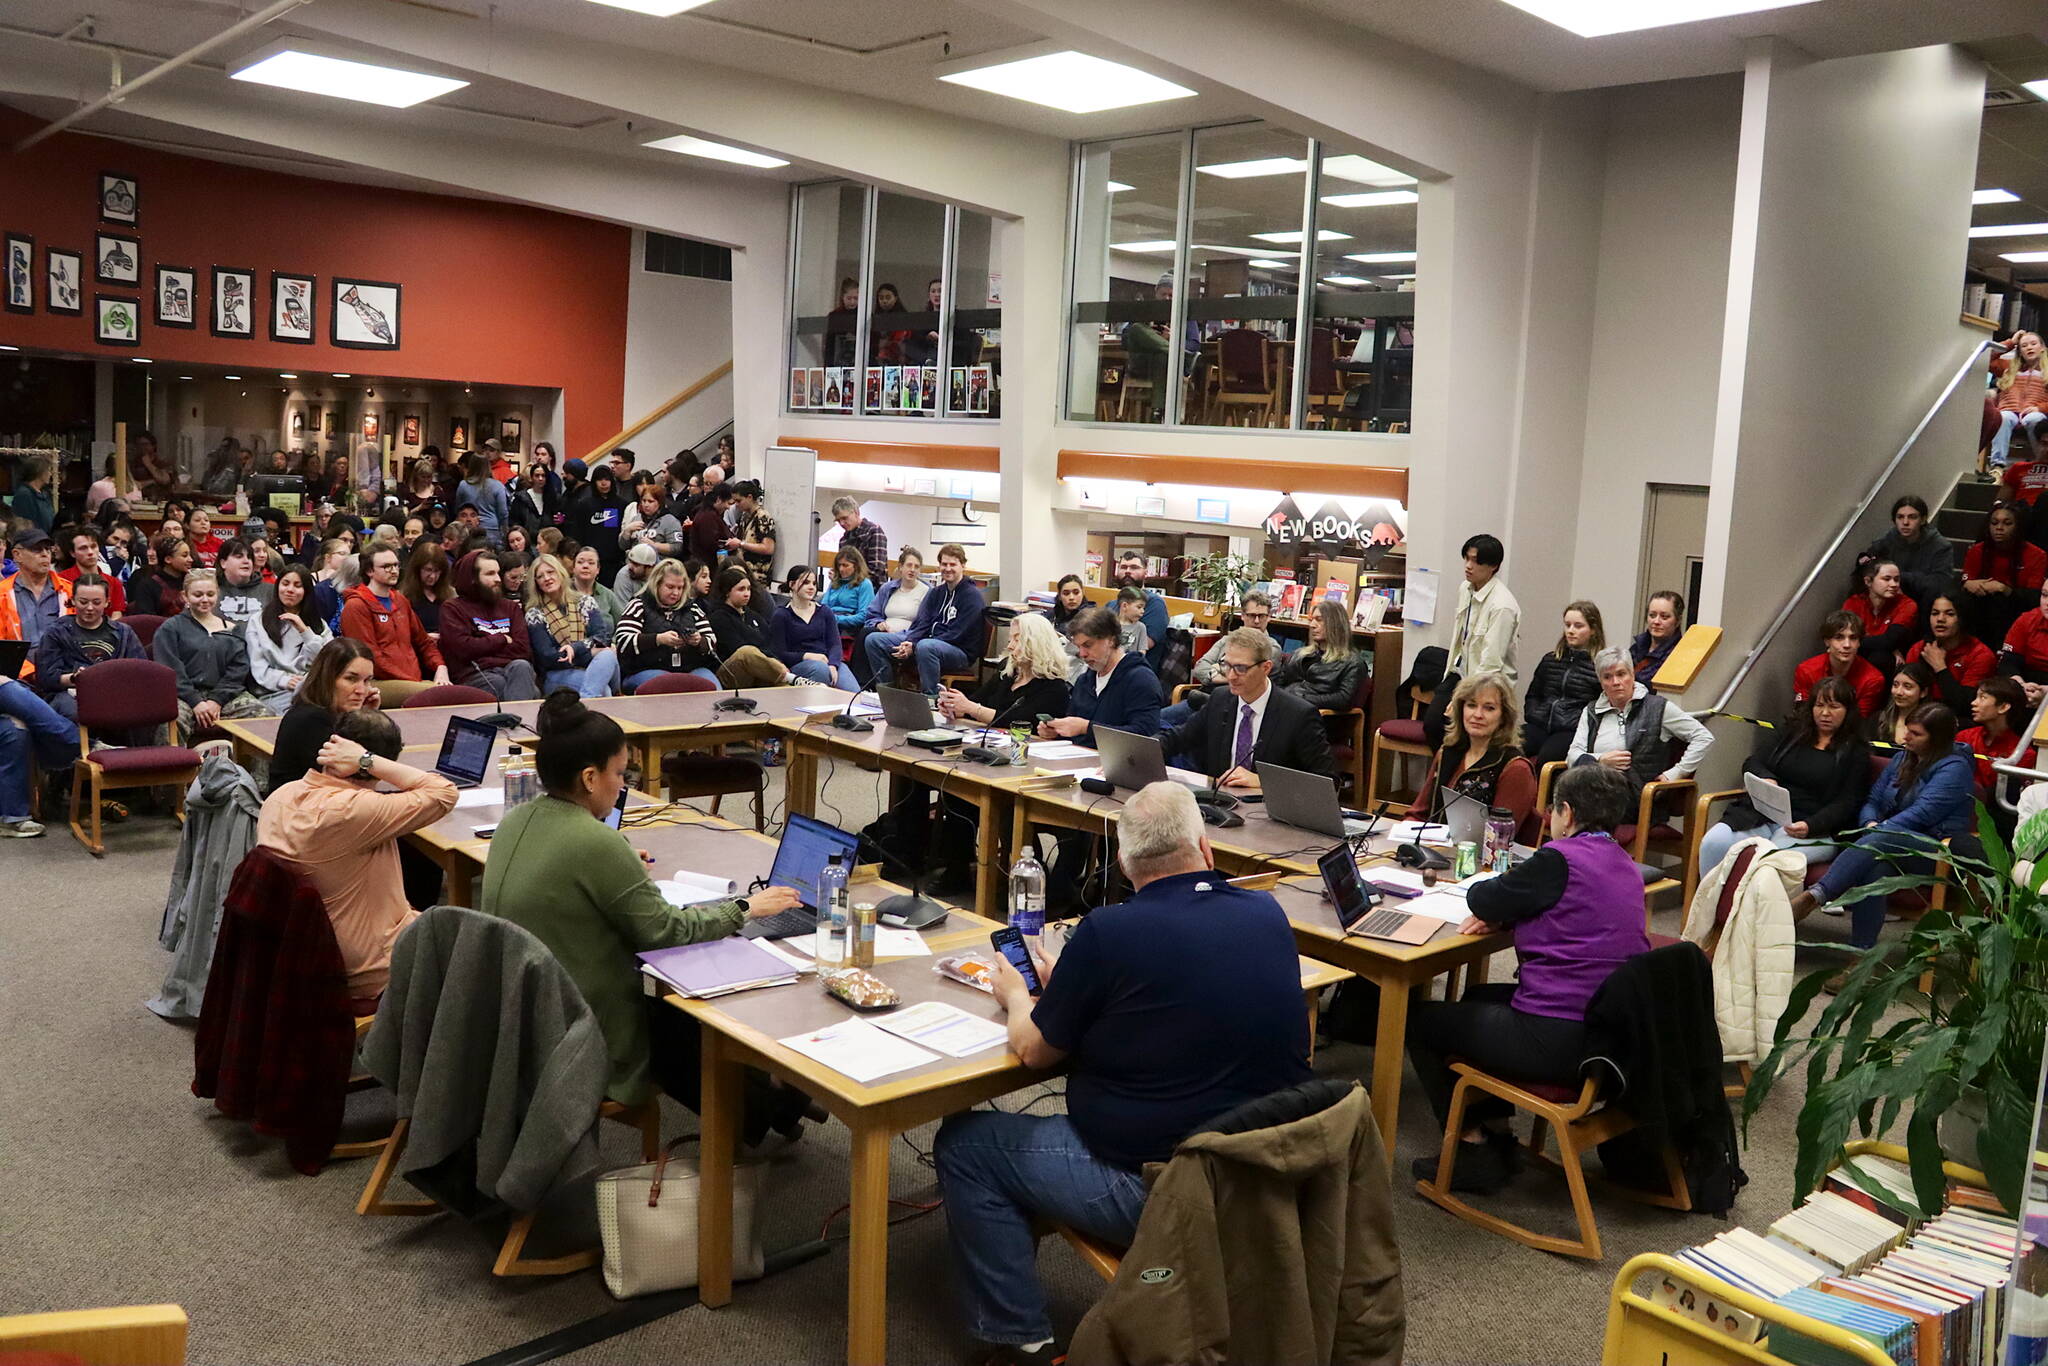 A crowd overflows the library at Juneau-Douglas High School: Yadaa.at Kalé on Thursday night as school board members meet to select a consolidation option to help resolve the Juneau School District’s budget crisis. (Mark Sabbatini / Juneau Empire)